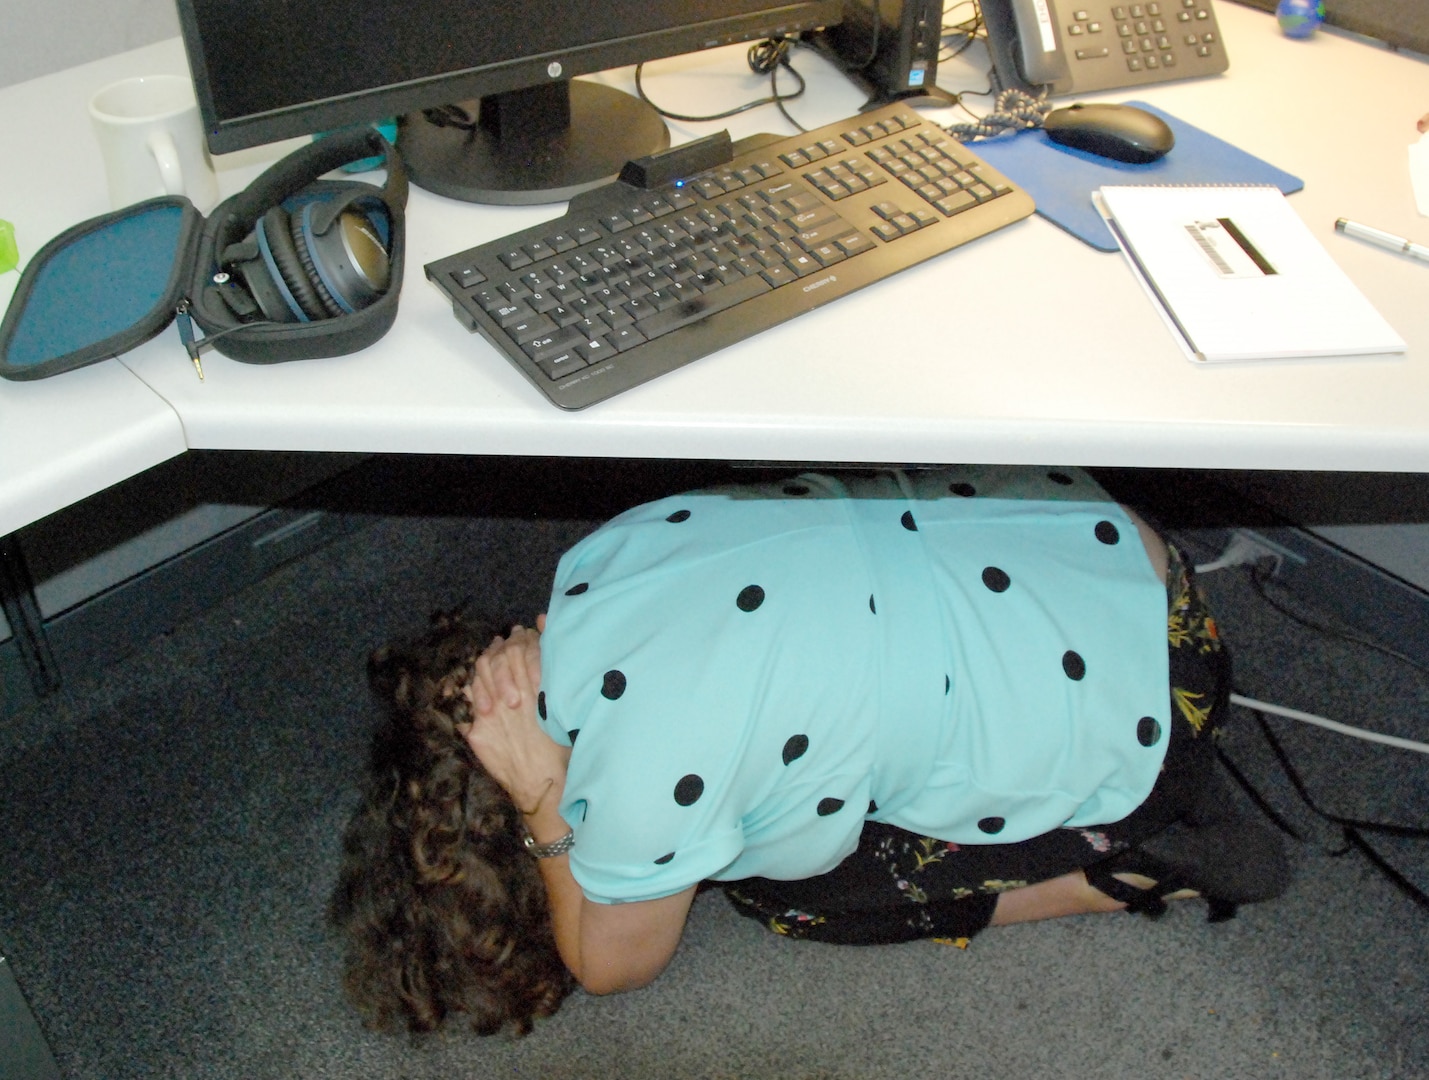 Linda Adams, a management analyst for Defense Logistics Agency Information Operations, demonstrates the “Drop, Cover and Hold On” guidelines for reducing injury and preventing death during earthquakes by curling up under her desk and placing her hands on the back of her neck. Photo by Beth Reece